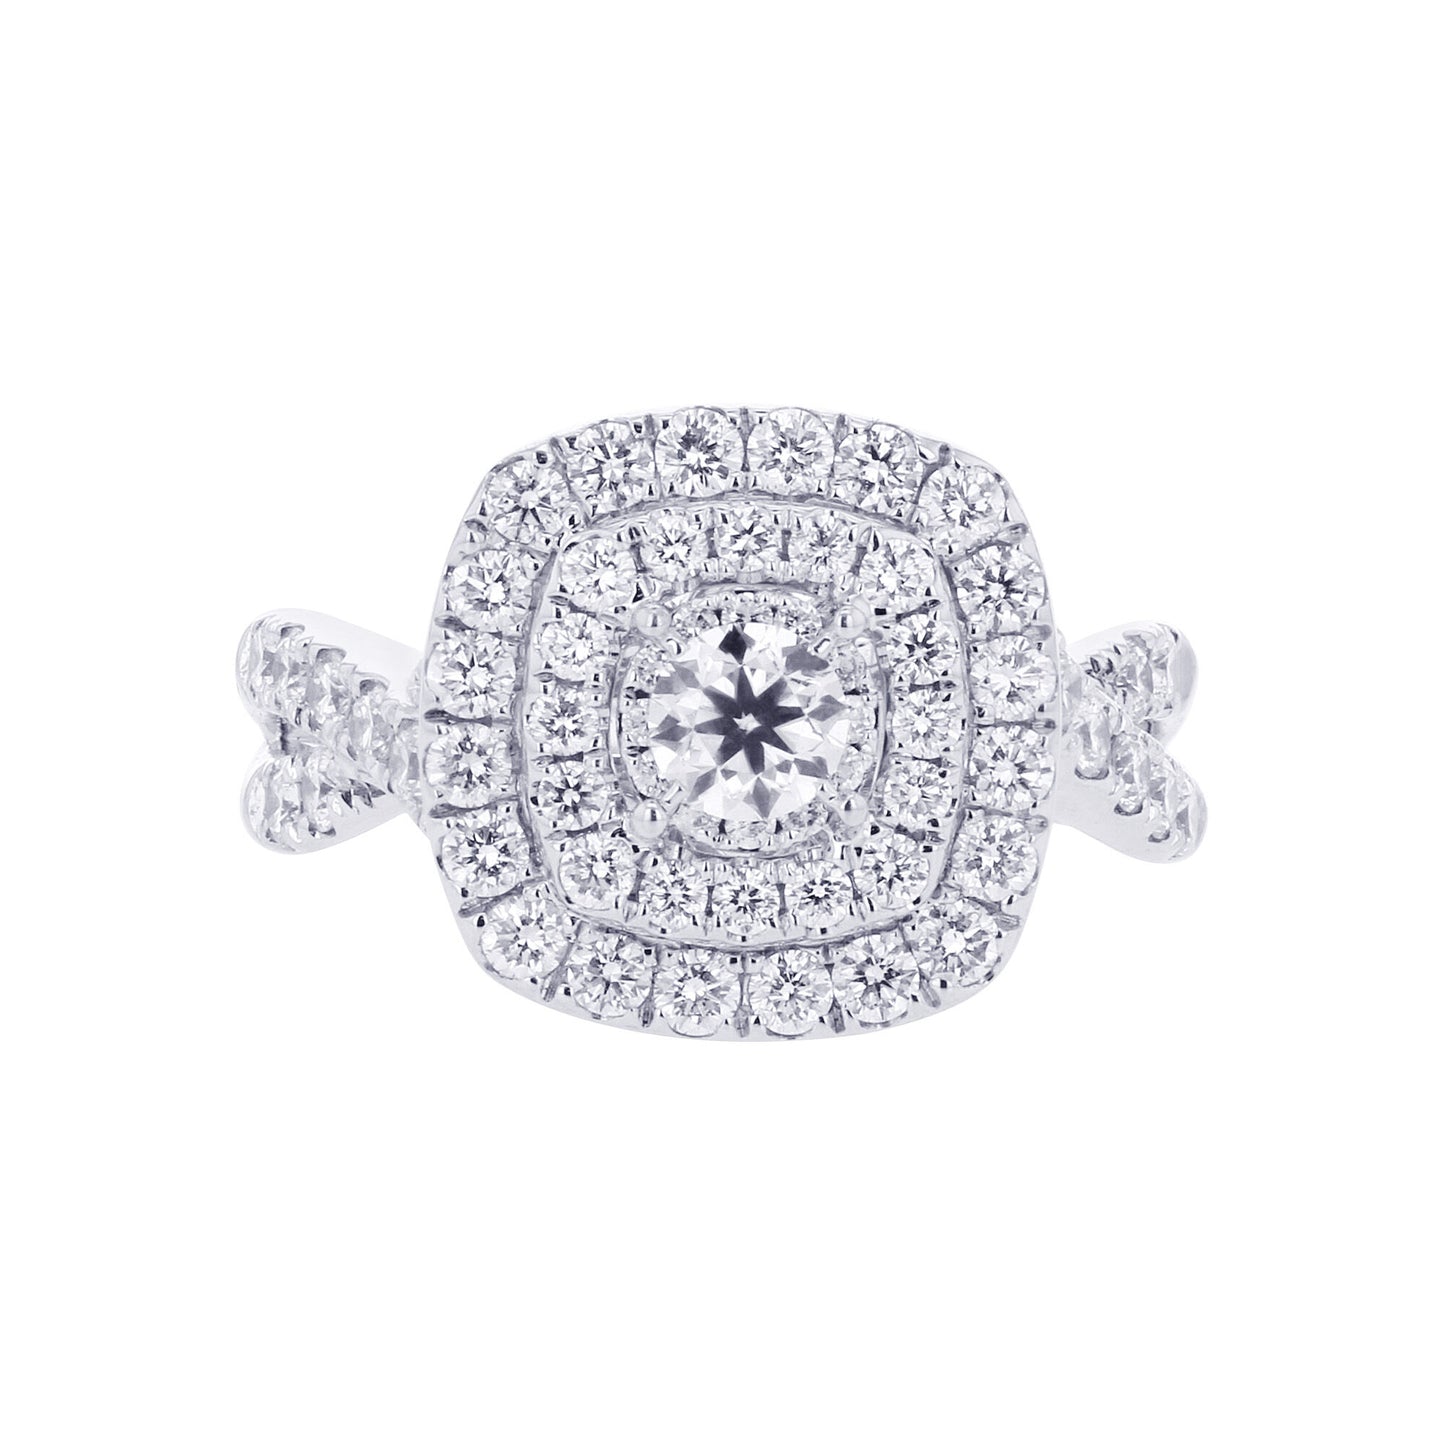 Ollie Double Cushion Halo Infinity Ready for Love Diamond Engagement Ring